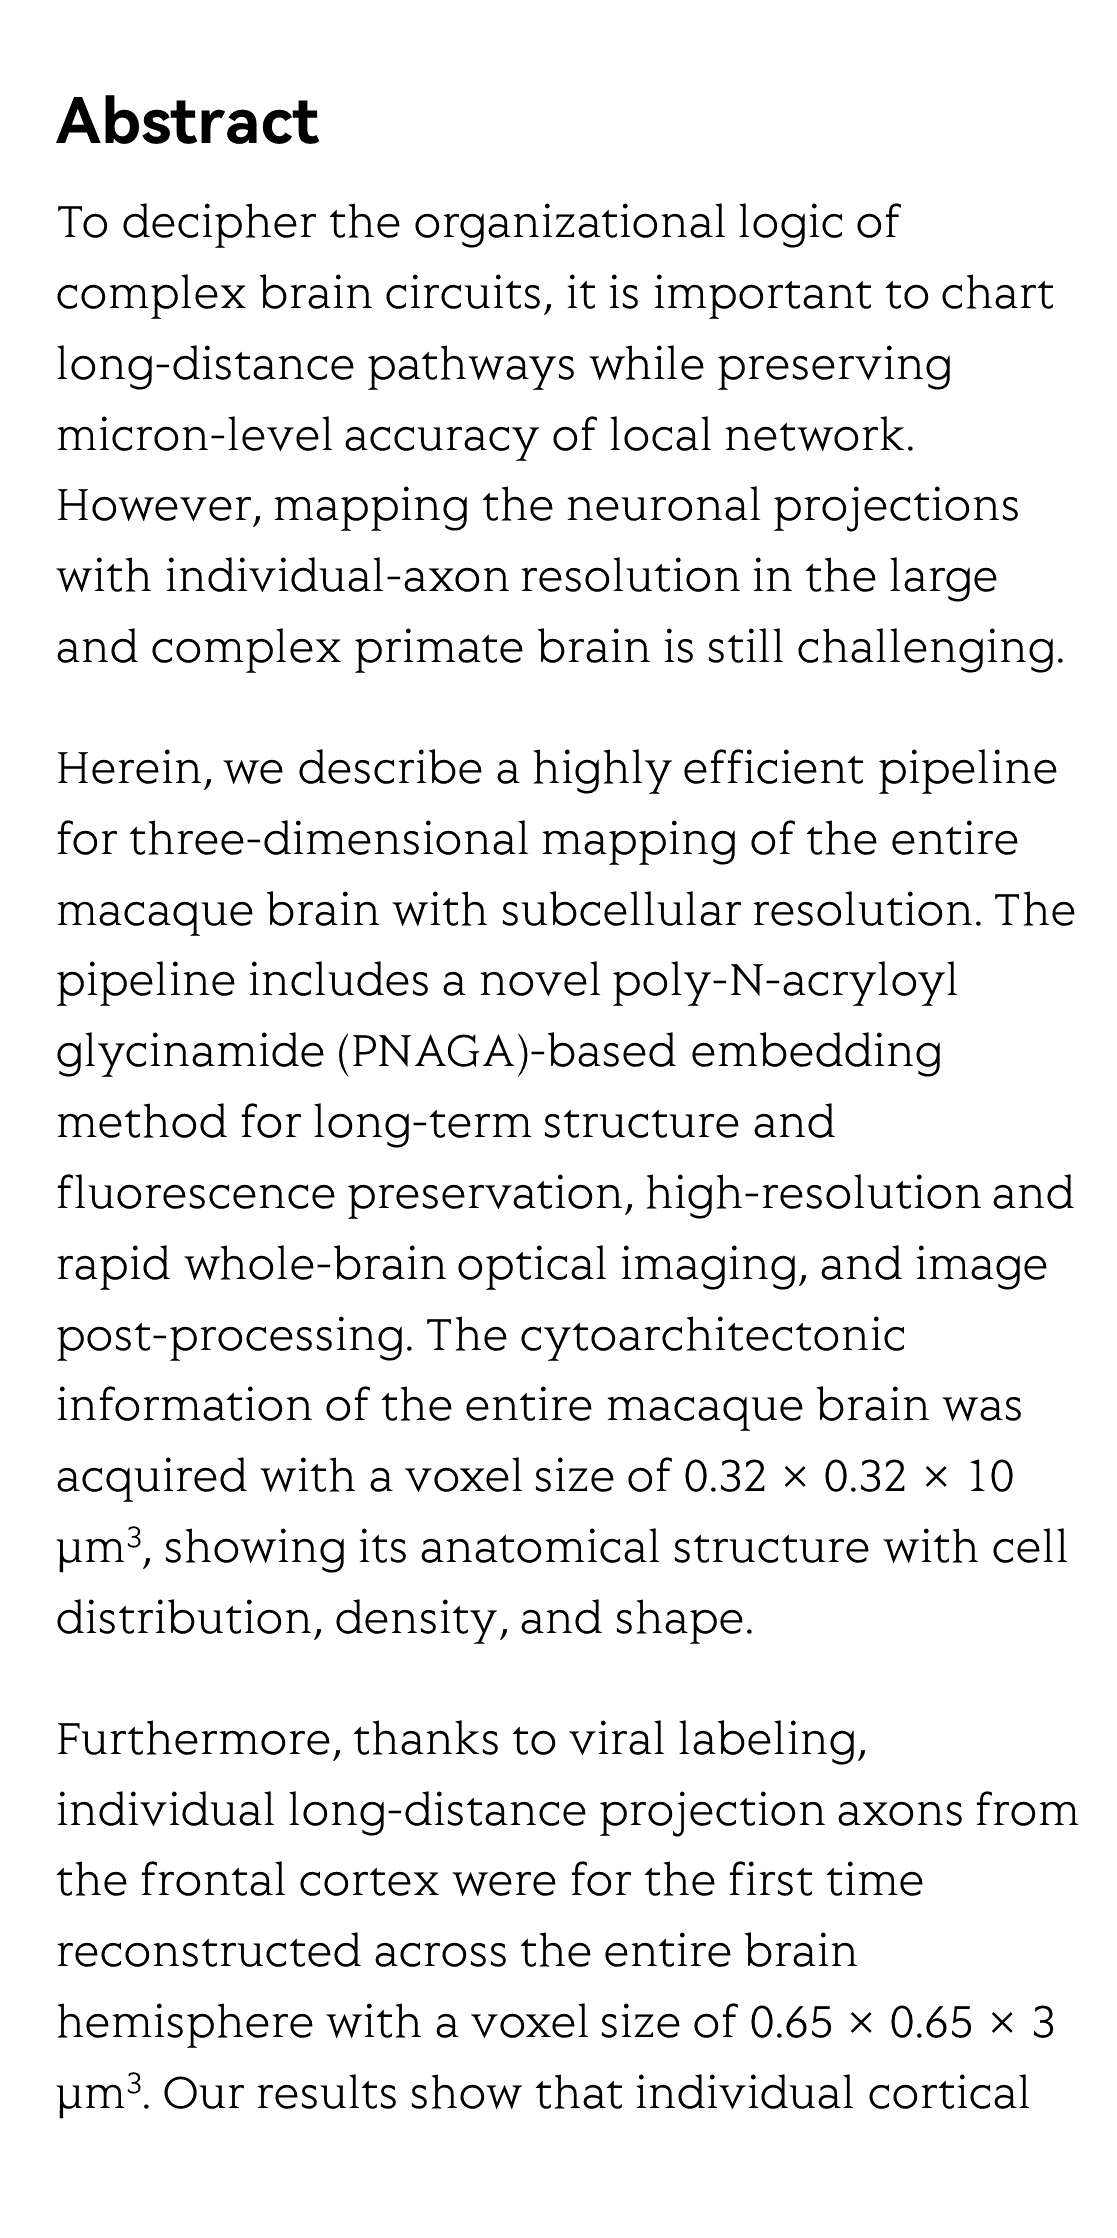 Continuous subcellular resolution three-dimensional imaging on intact macaque brain_3